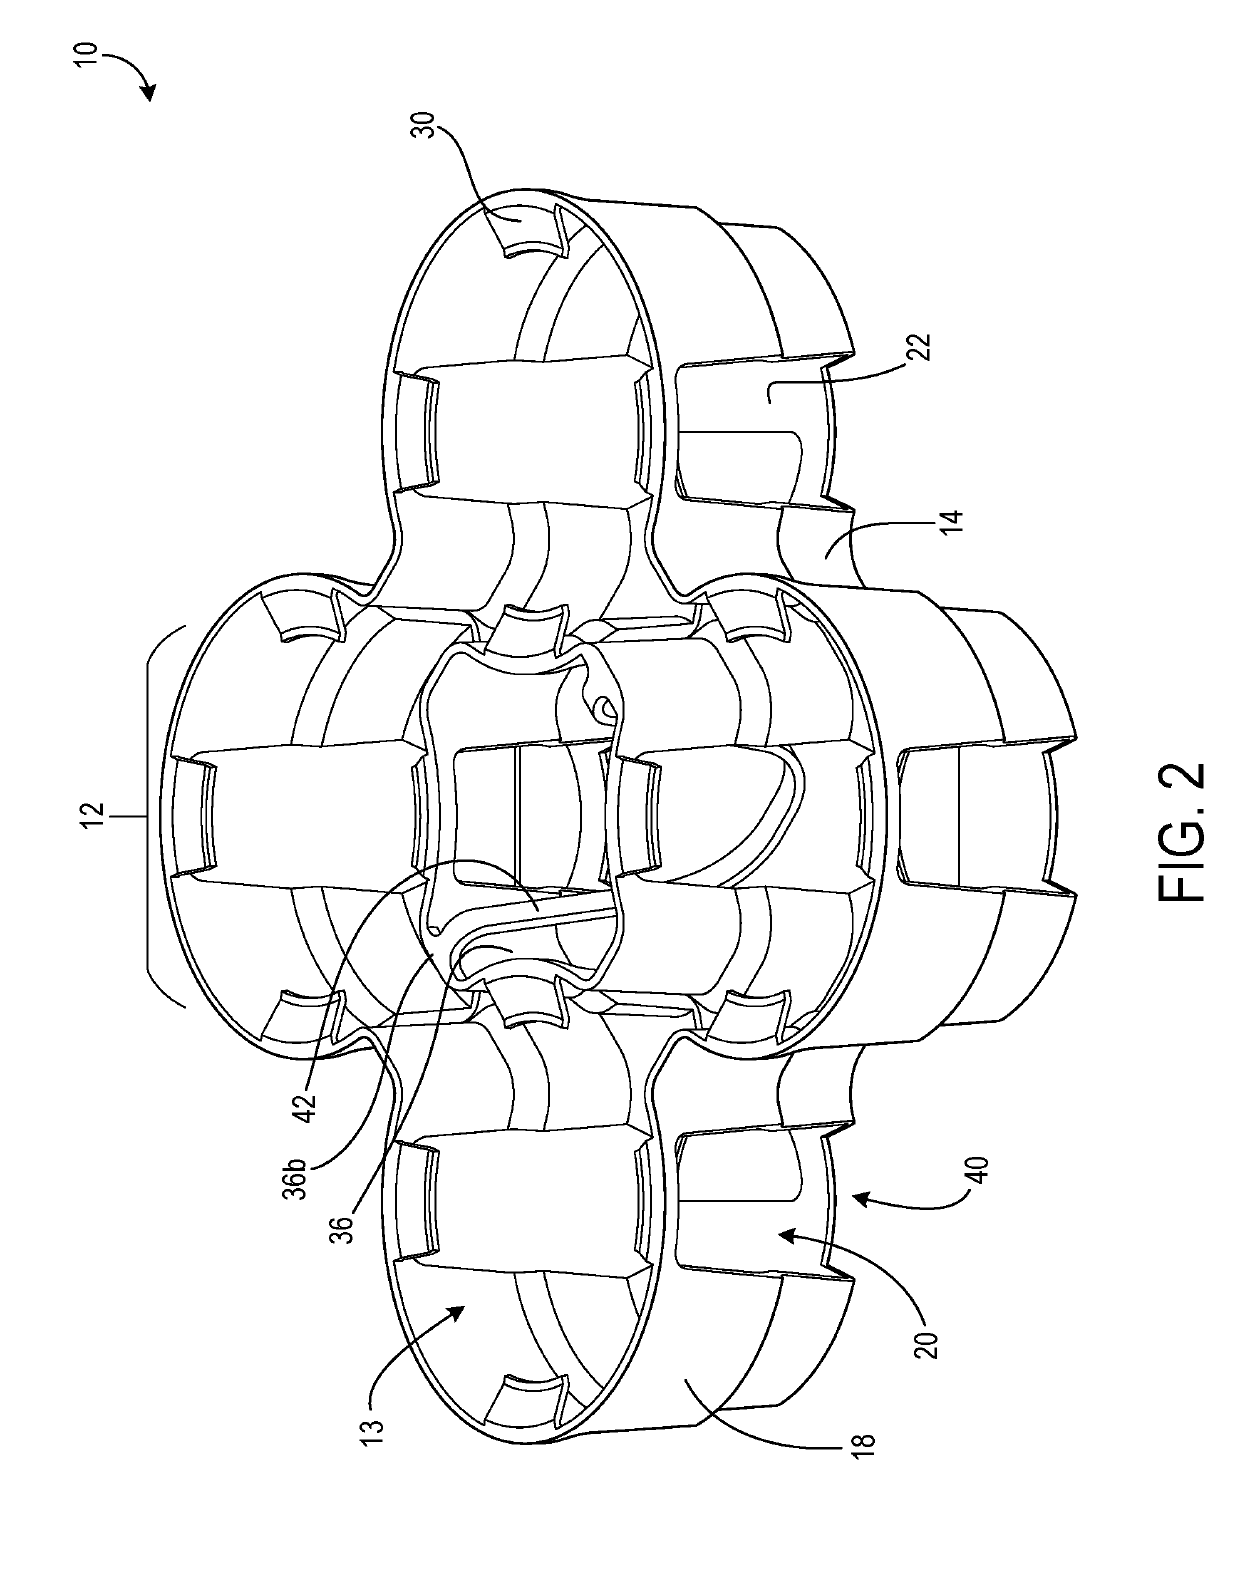 Container carrier with flexible flange